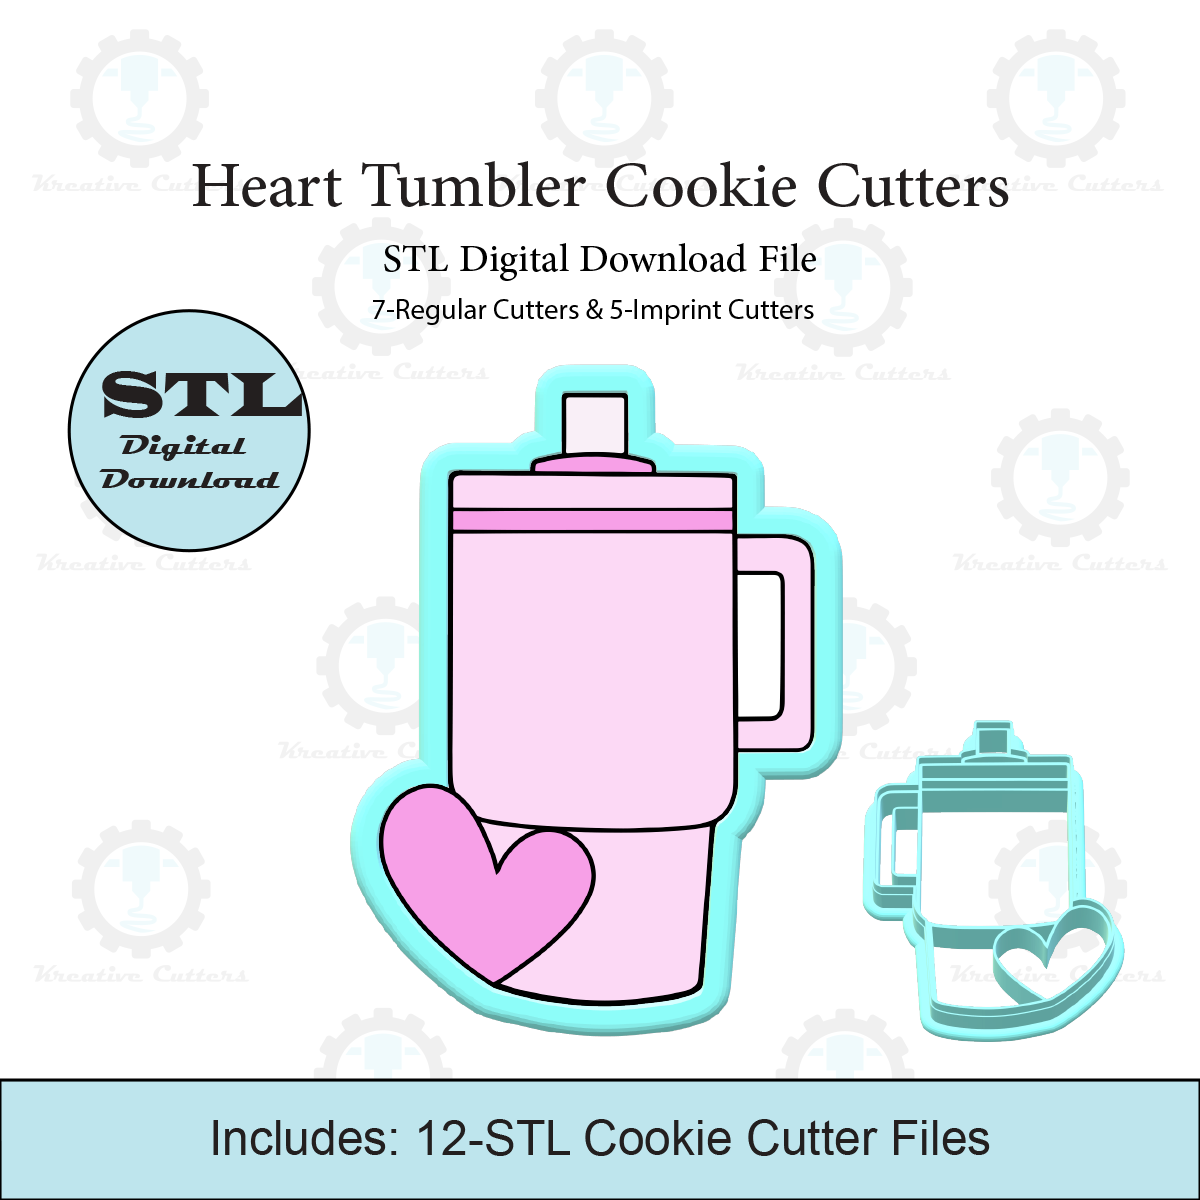 Heart Tumbler Cookie Cutters | Standard & Imprint Cutters Included | STL Files